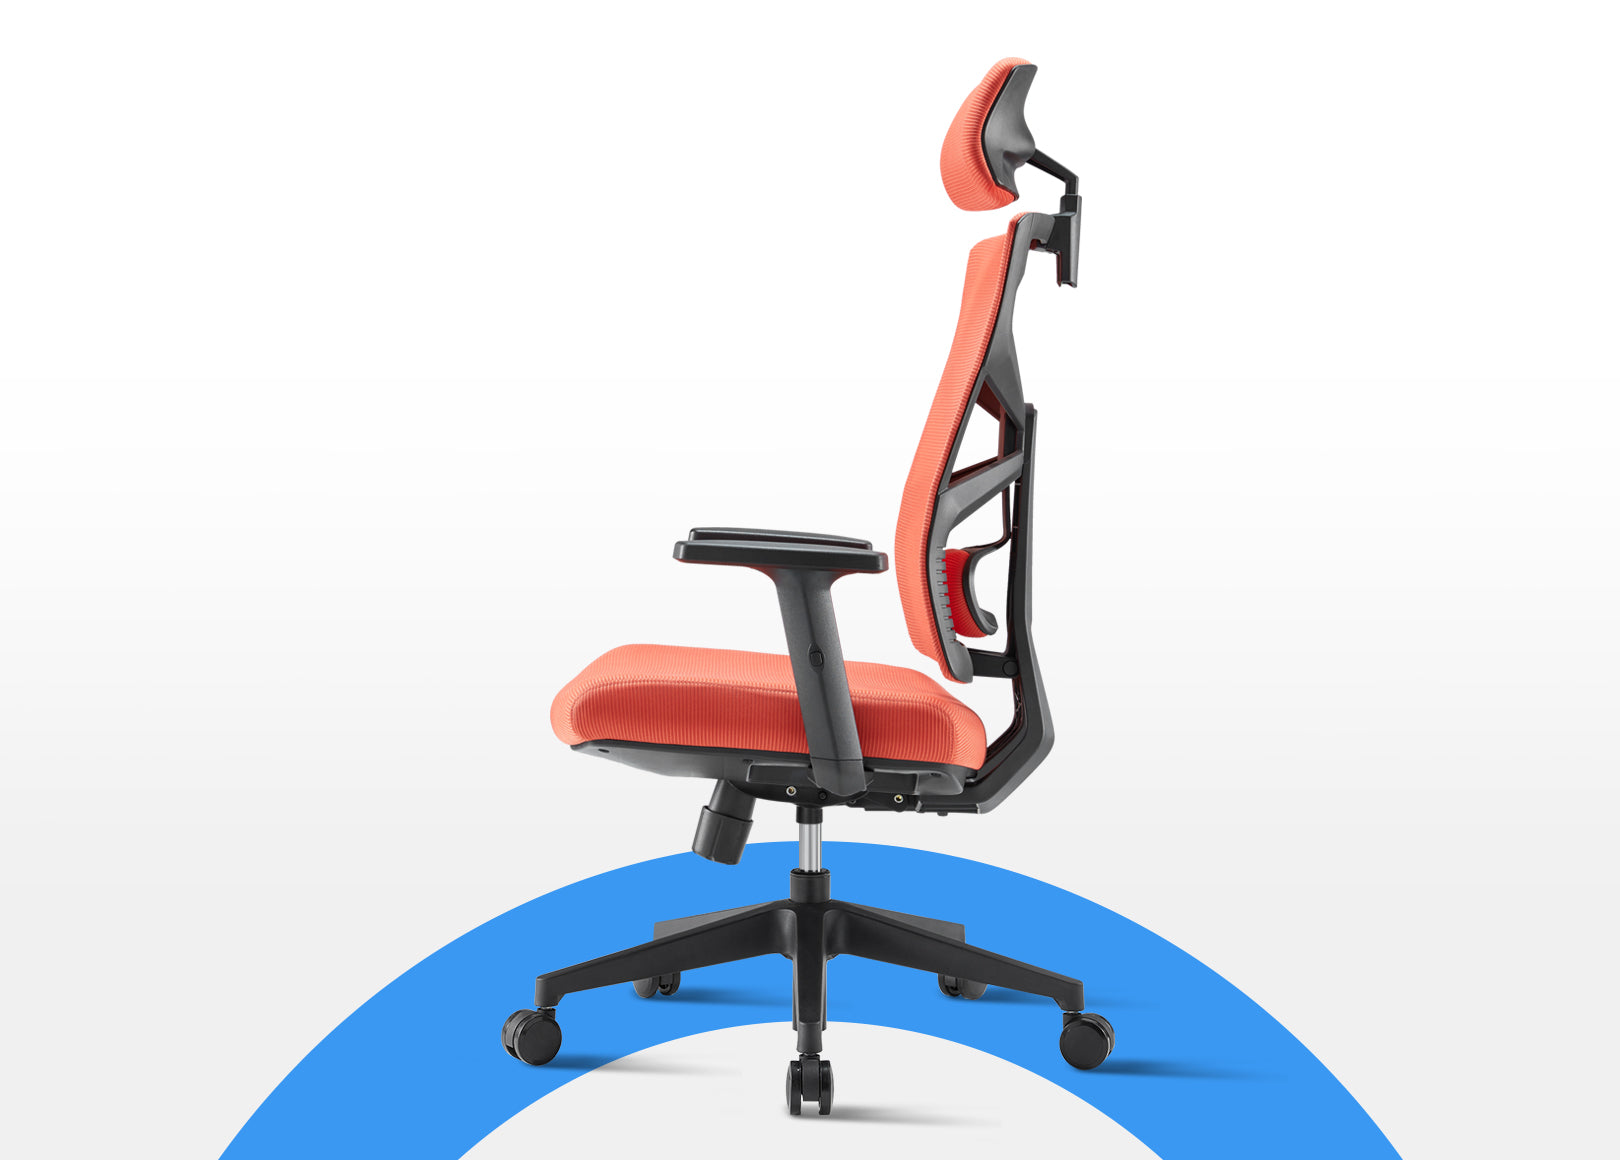 Stay Comfortable and Healthy with Orange Voyager Ergonomic Task Chair: Adjustable Lumbar Support, Lockable Backrest, and Height-Adjustable Armrests